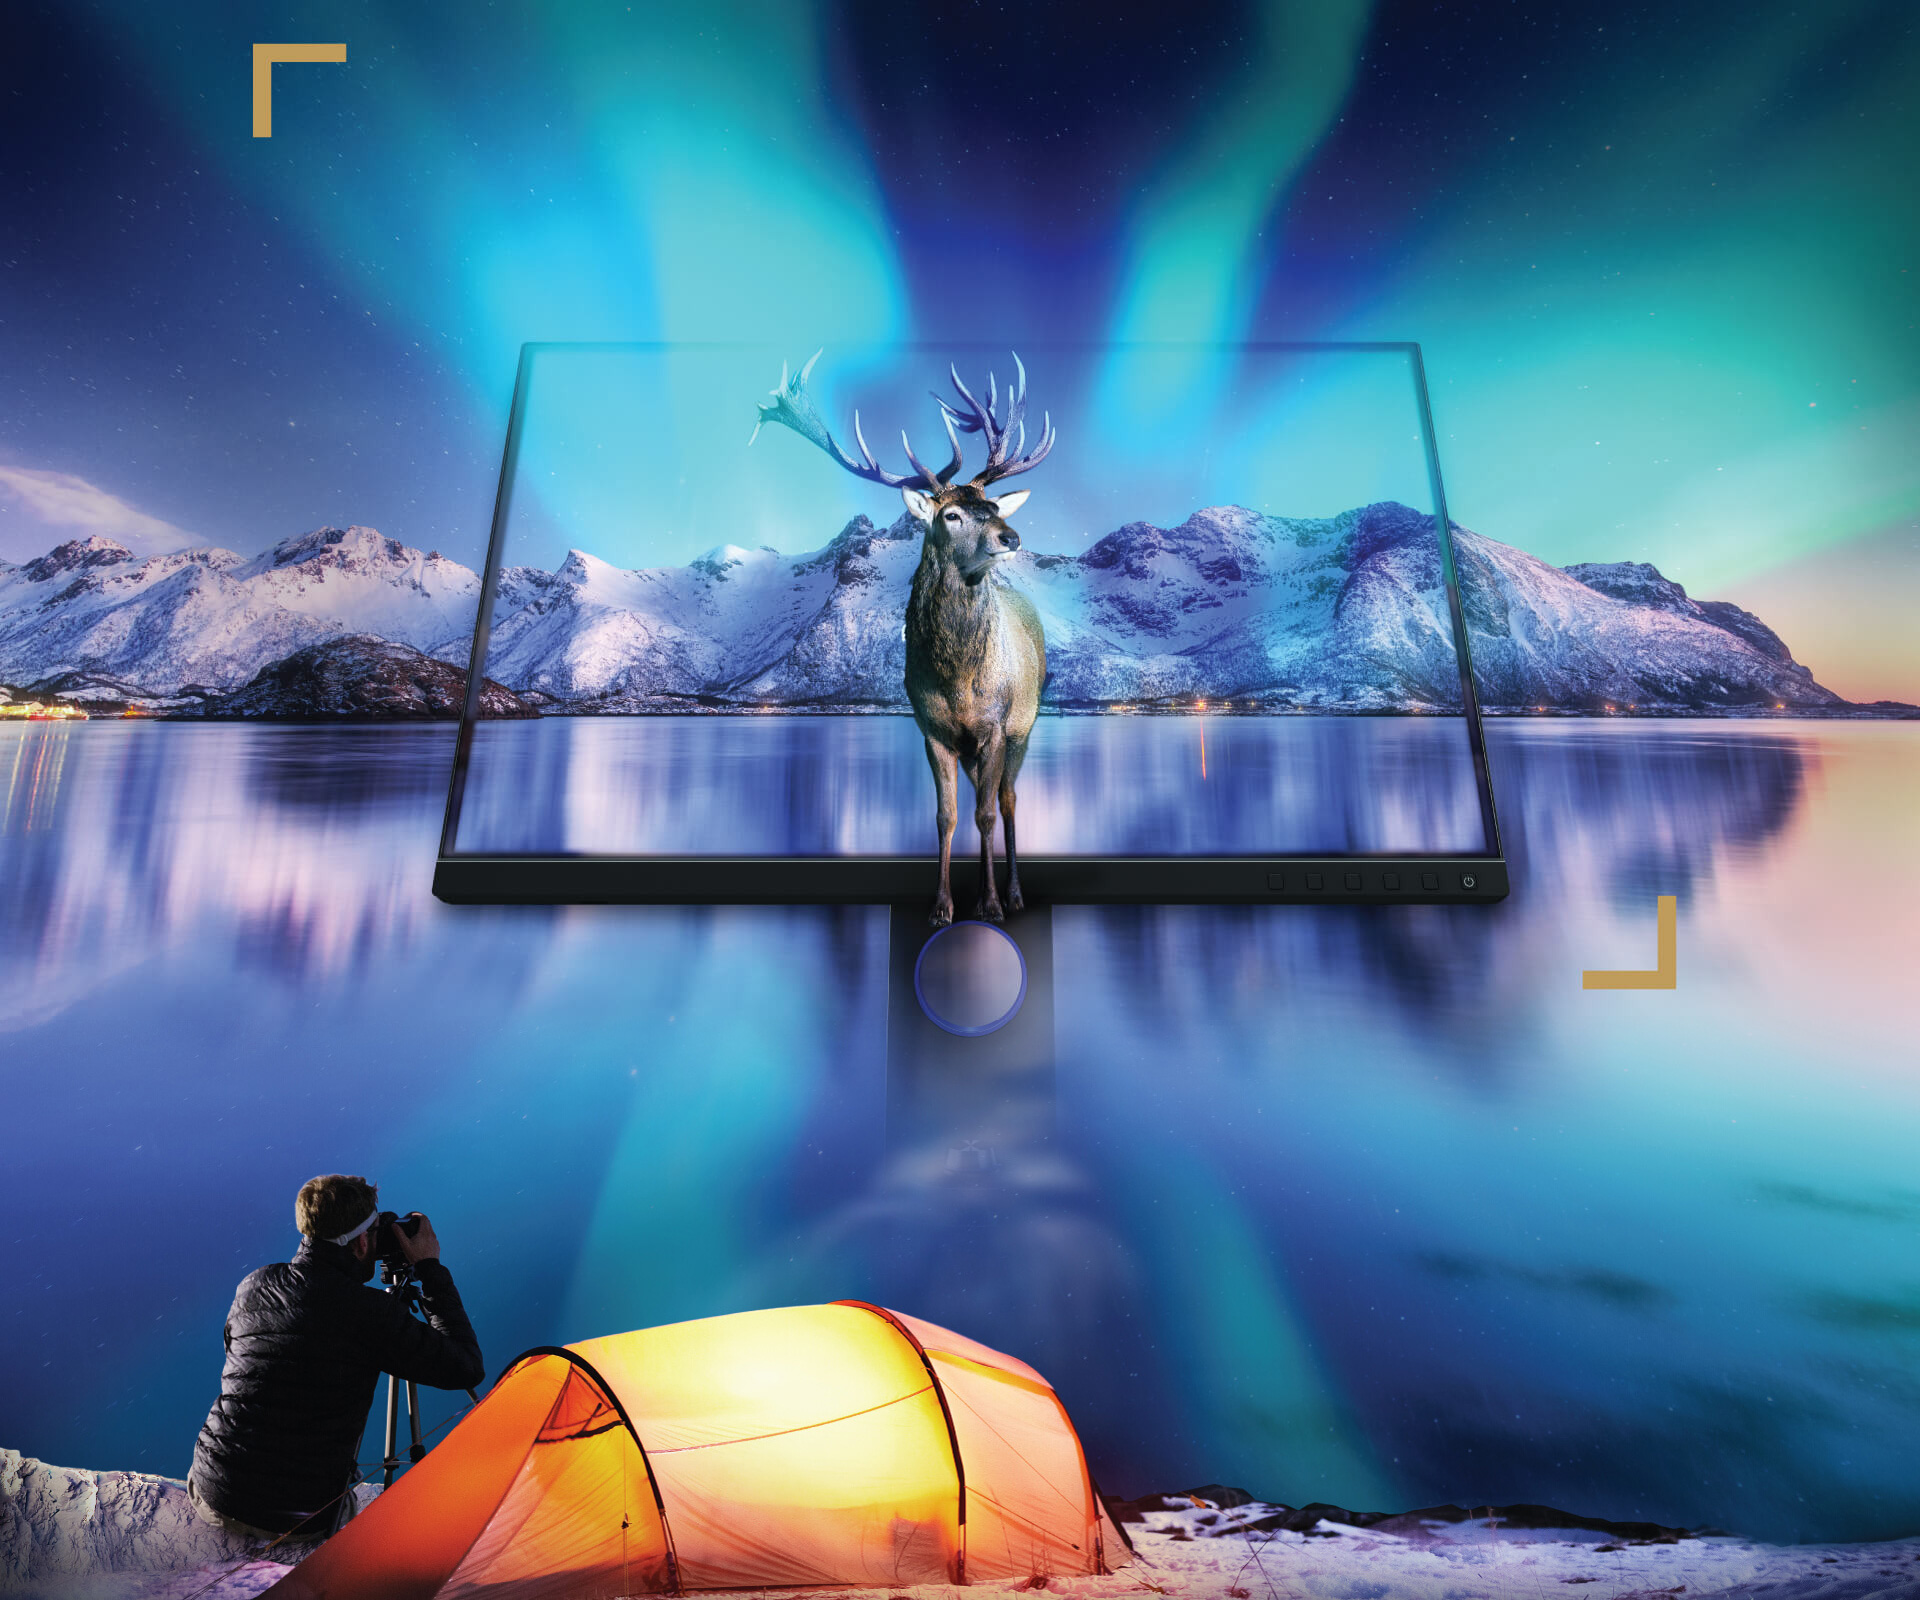 BenQ SW270C Monitor Screen Angled Up, Blending in with the larger image of a Reindeer on on a lake in front of snow covered mountains. Below the lake is a man leaning down, taking a photo next to his tent that has light inside